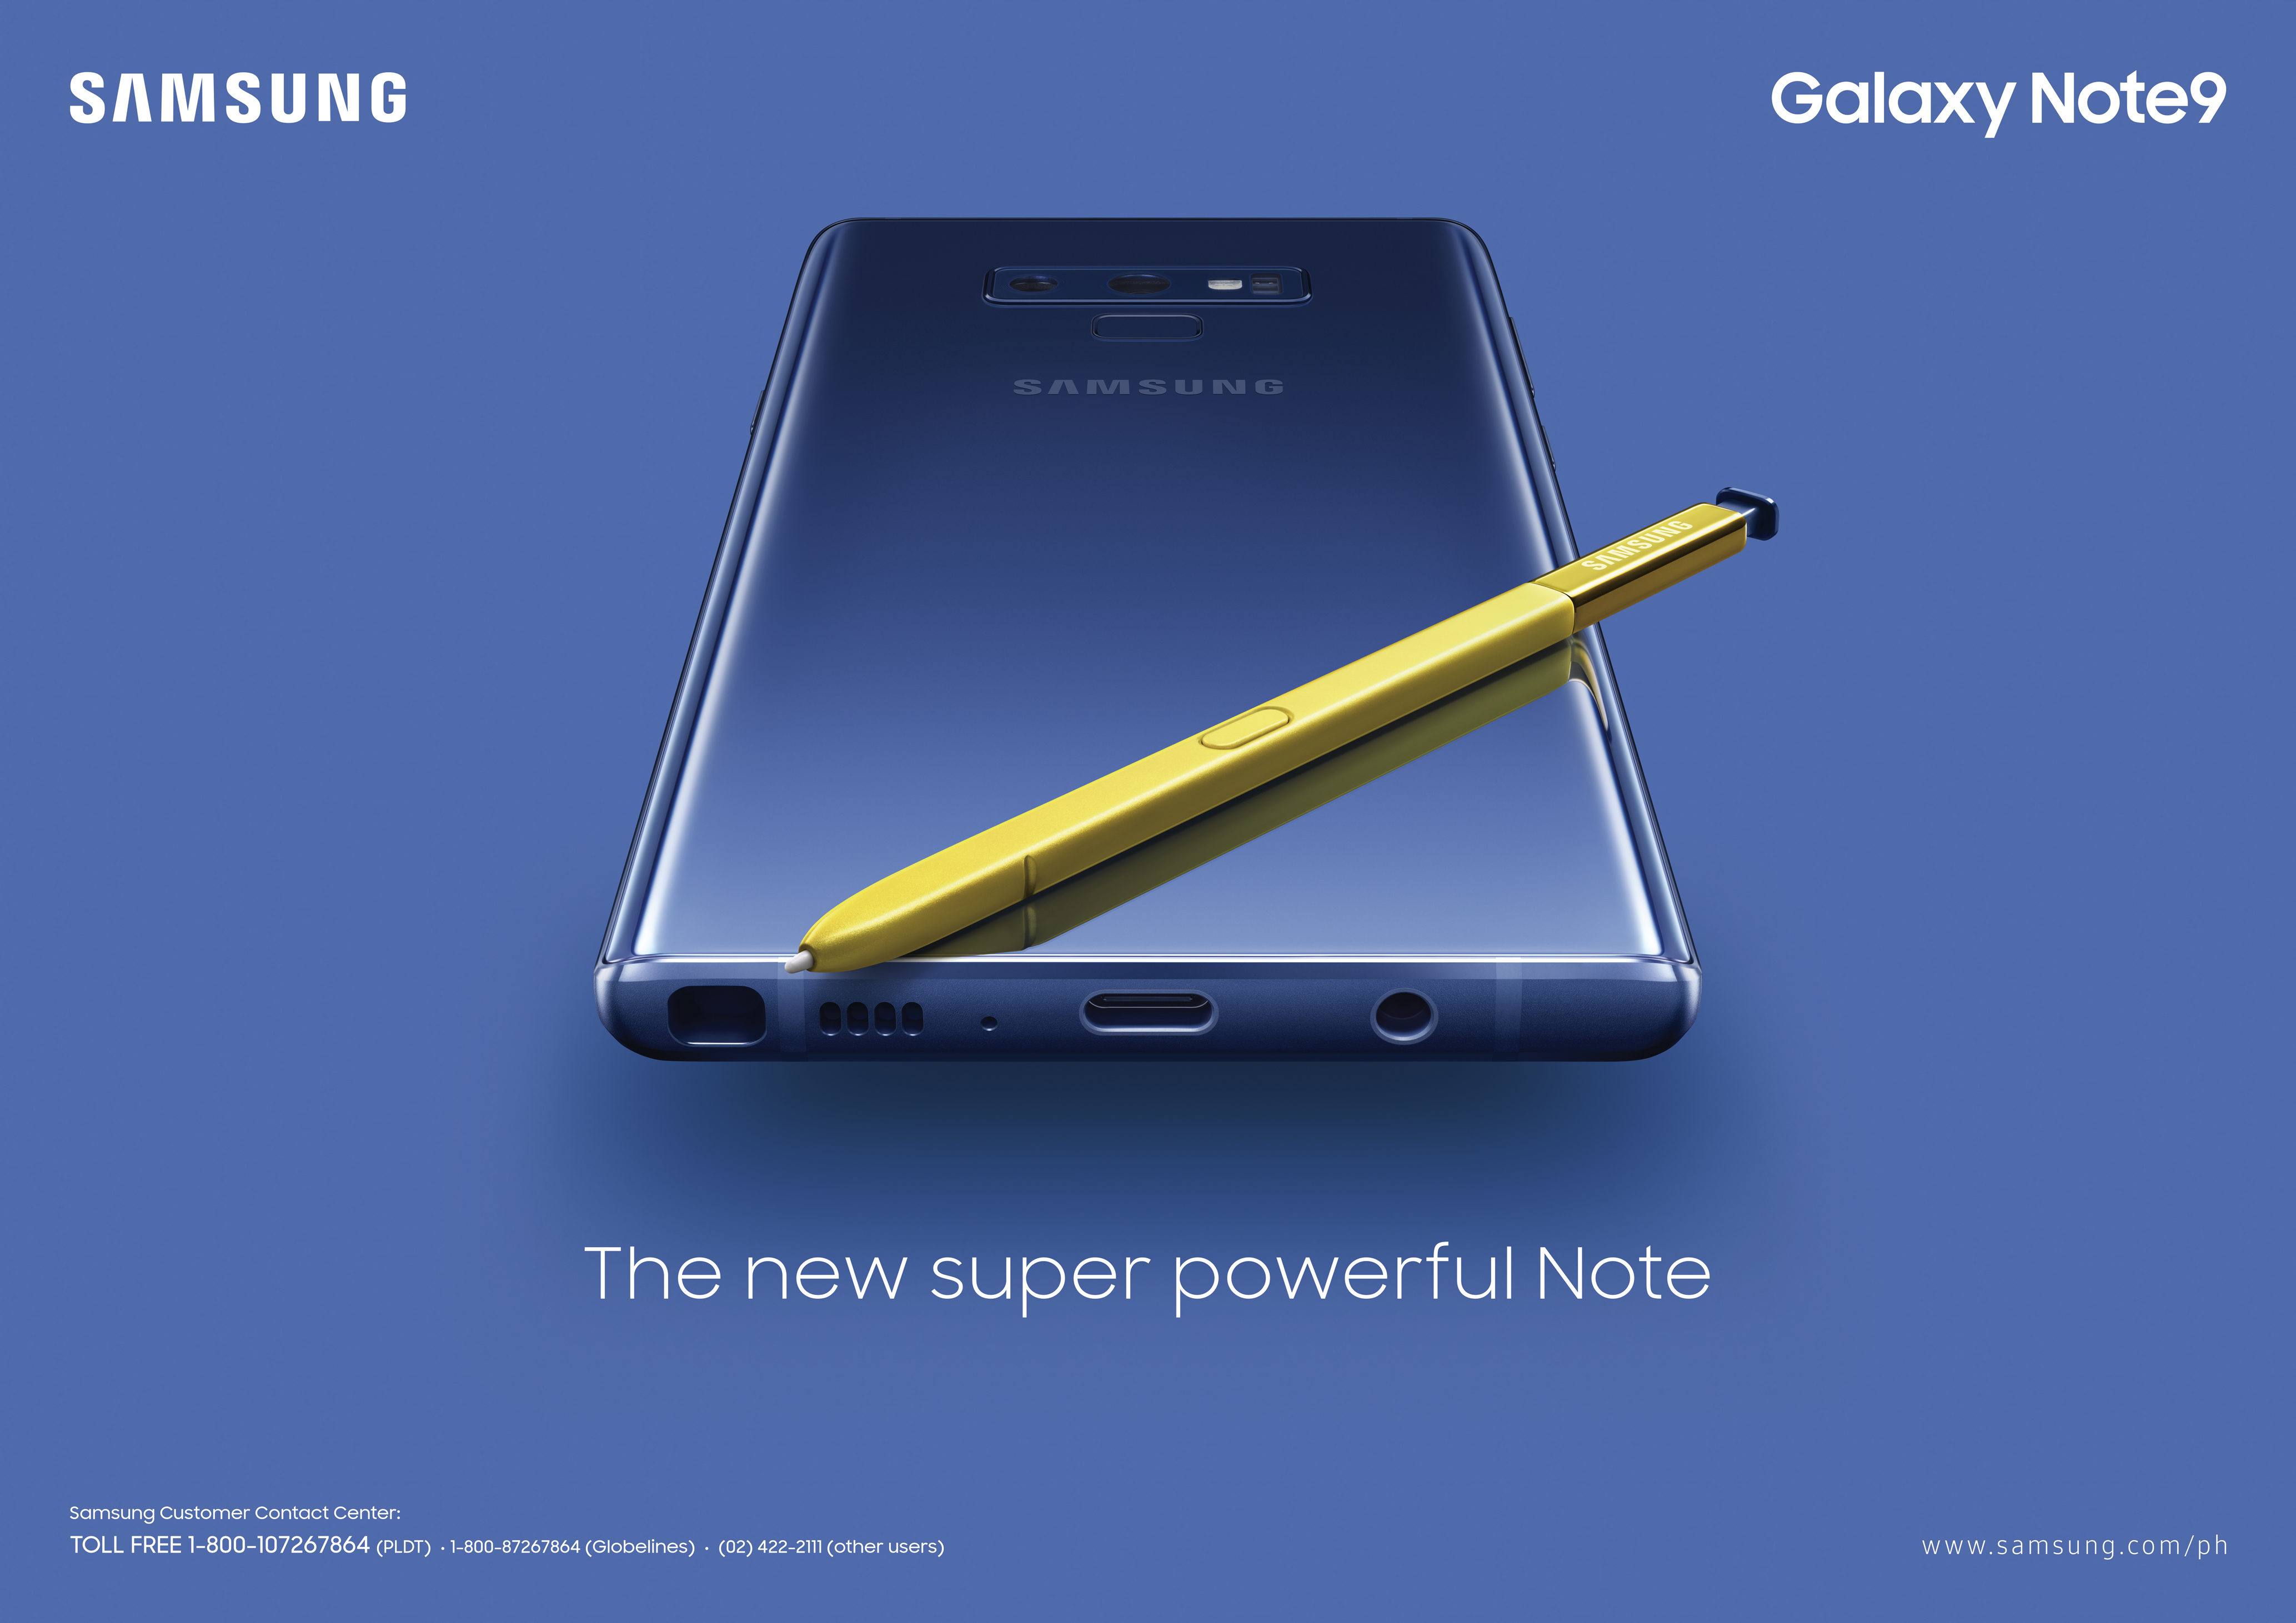 Pre-order the Samsung Galaxy Note9 until August 19